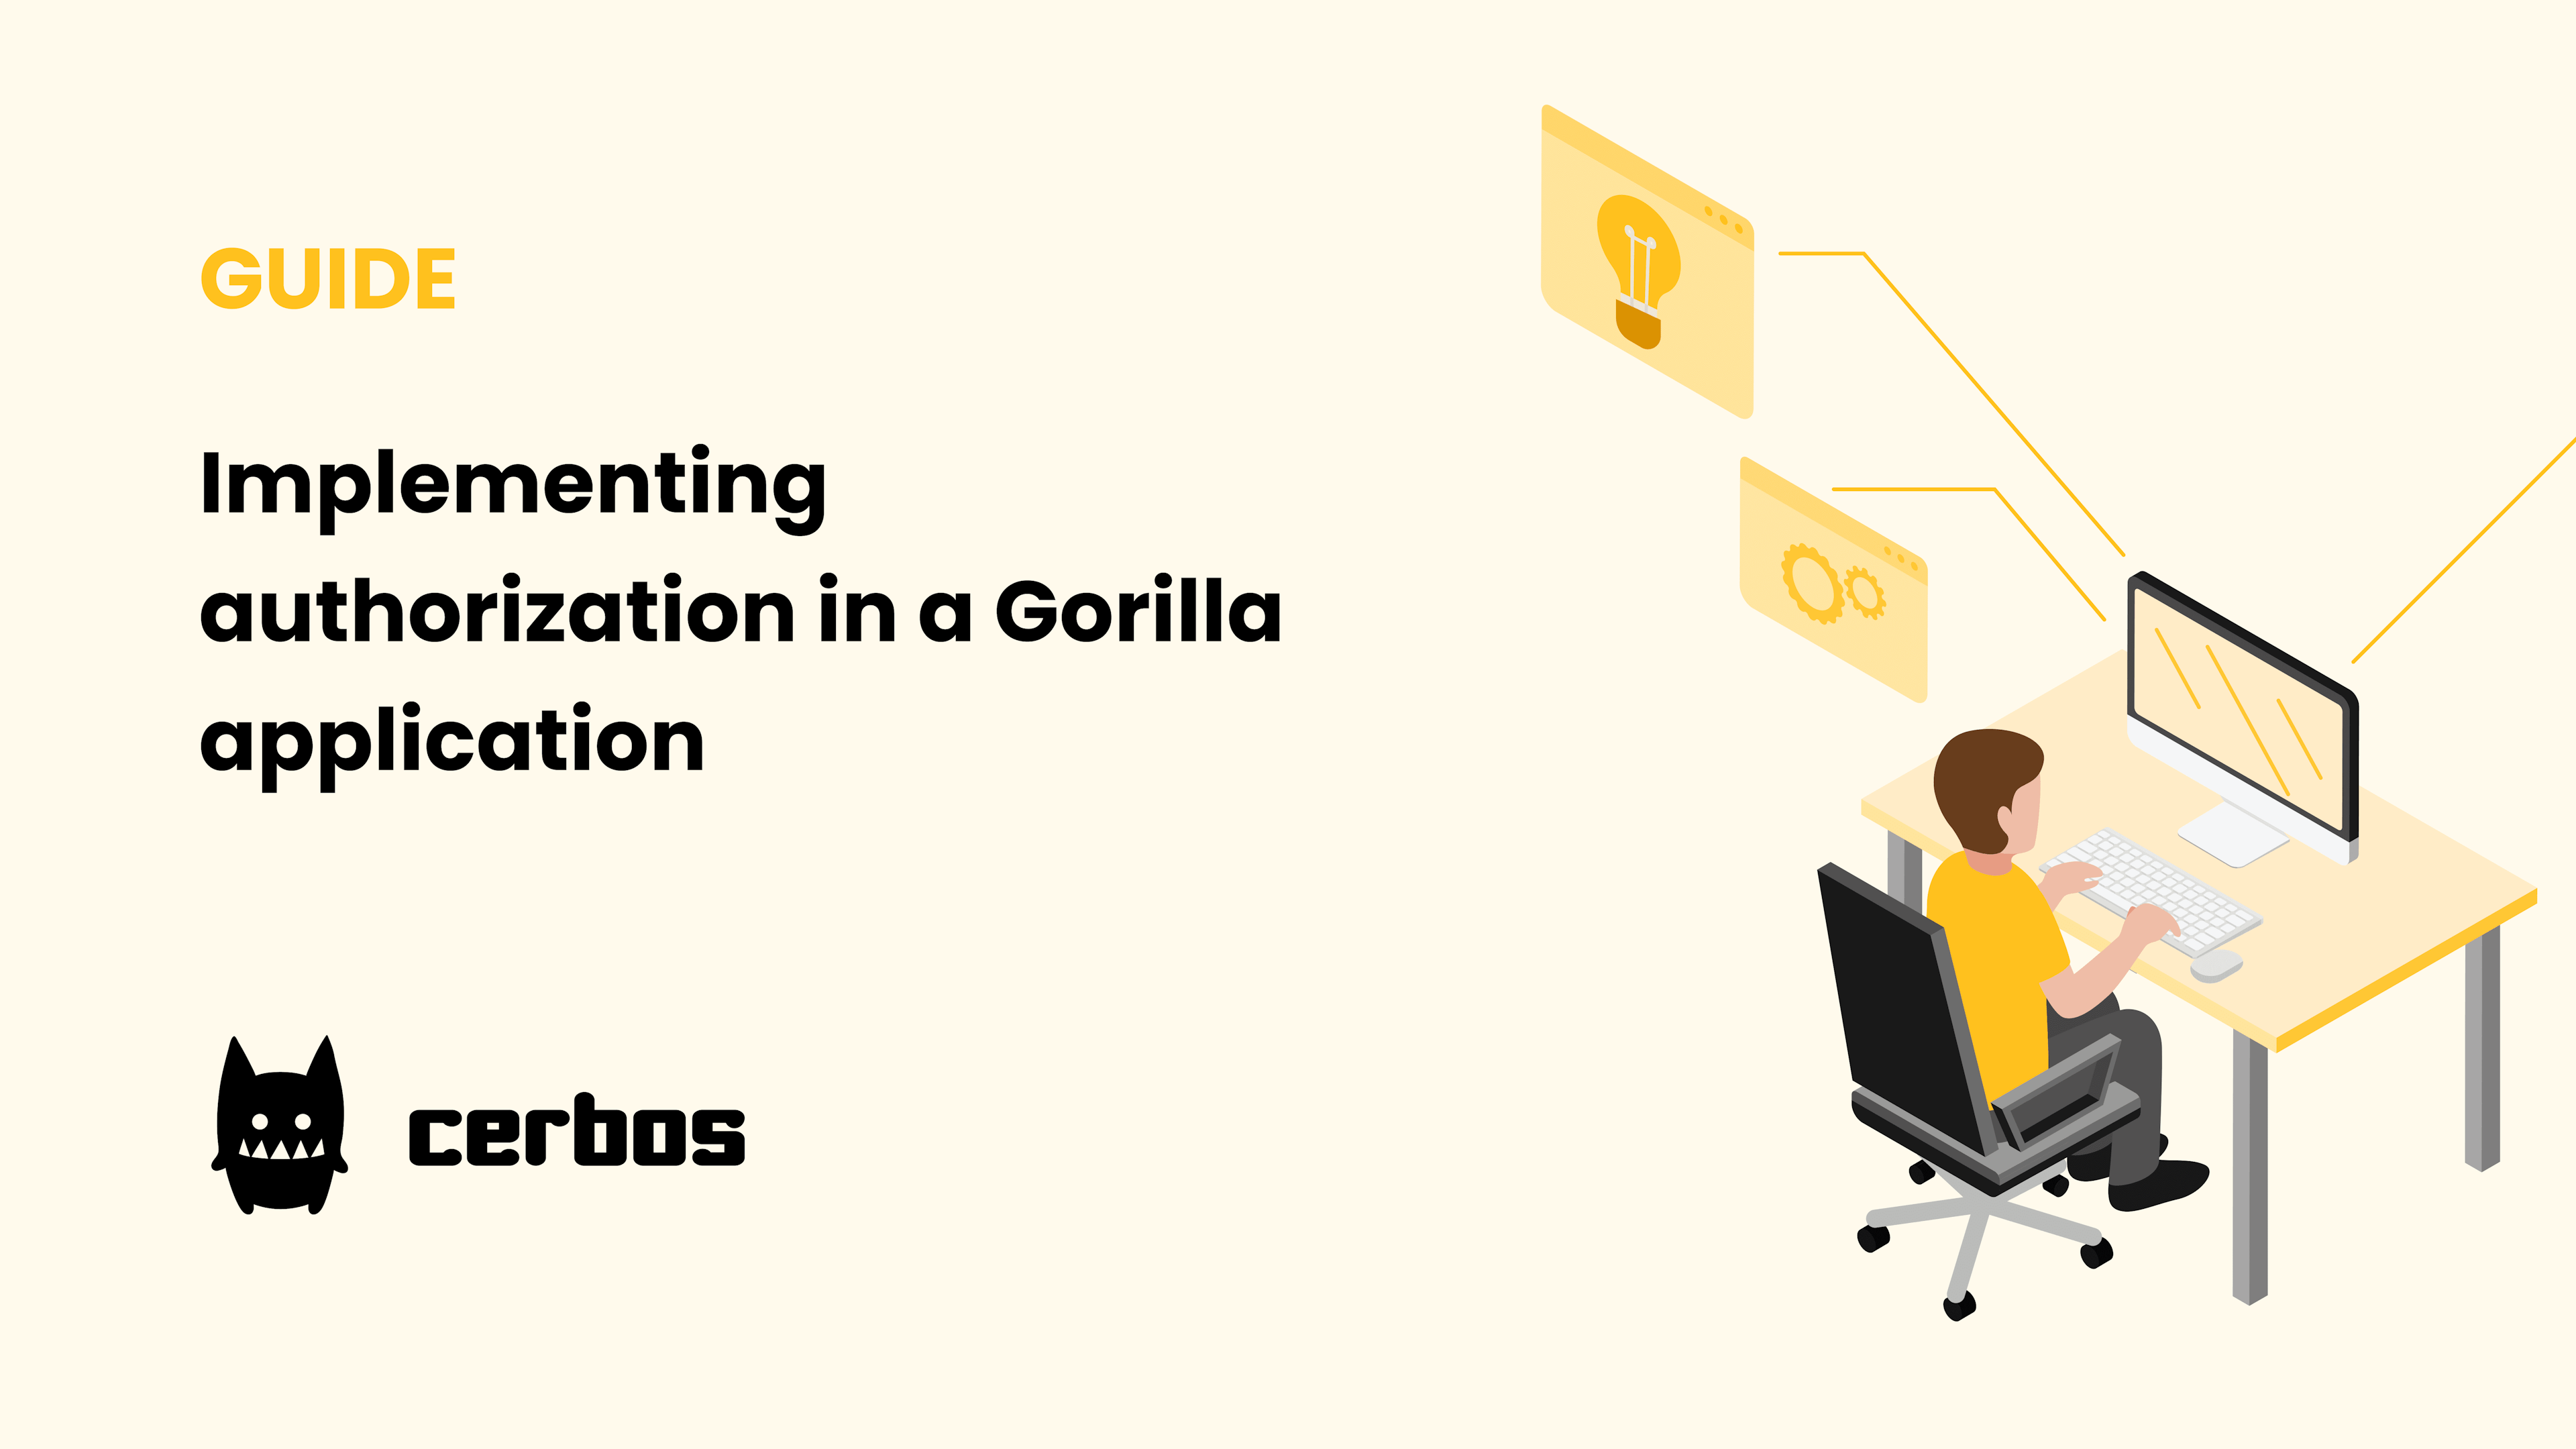 How to implement authorization in a Gorilla application